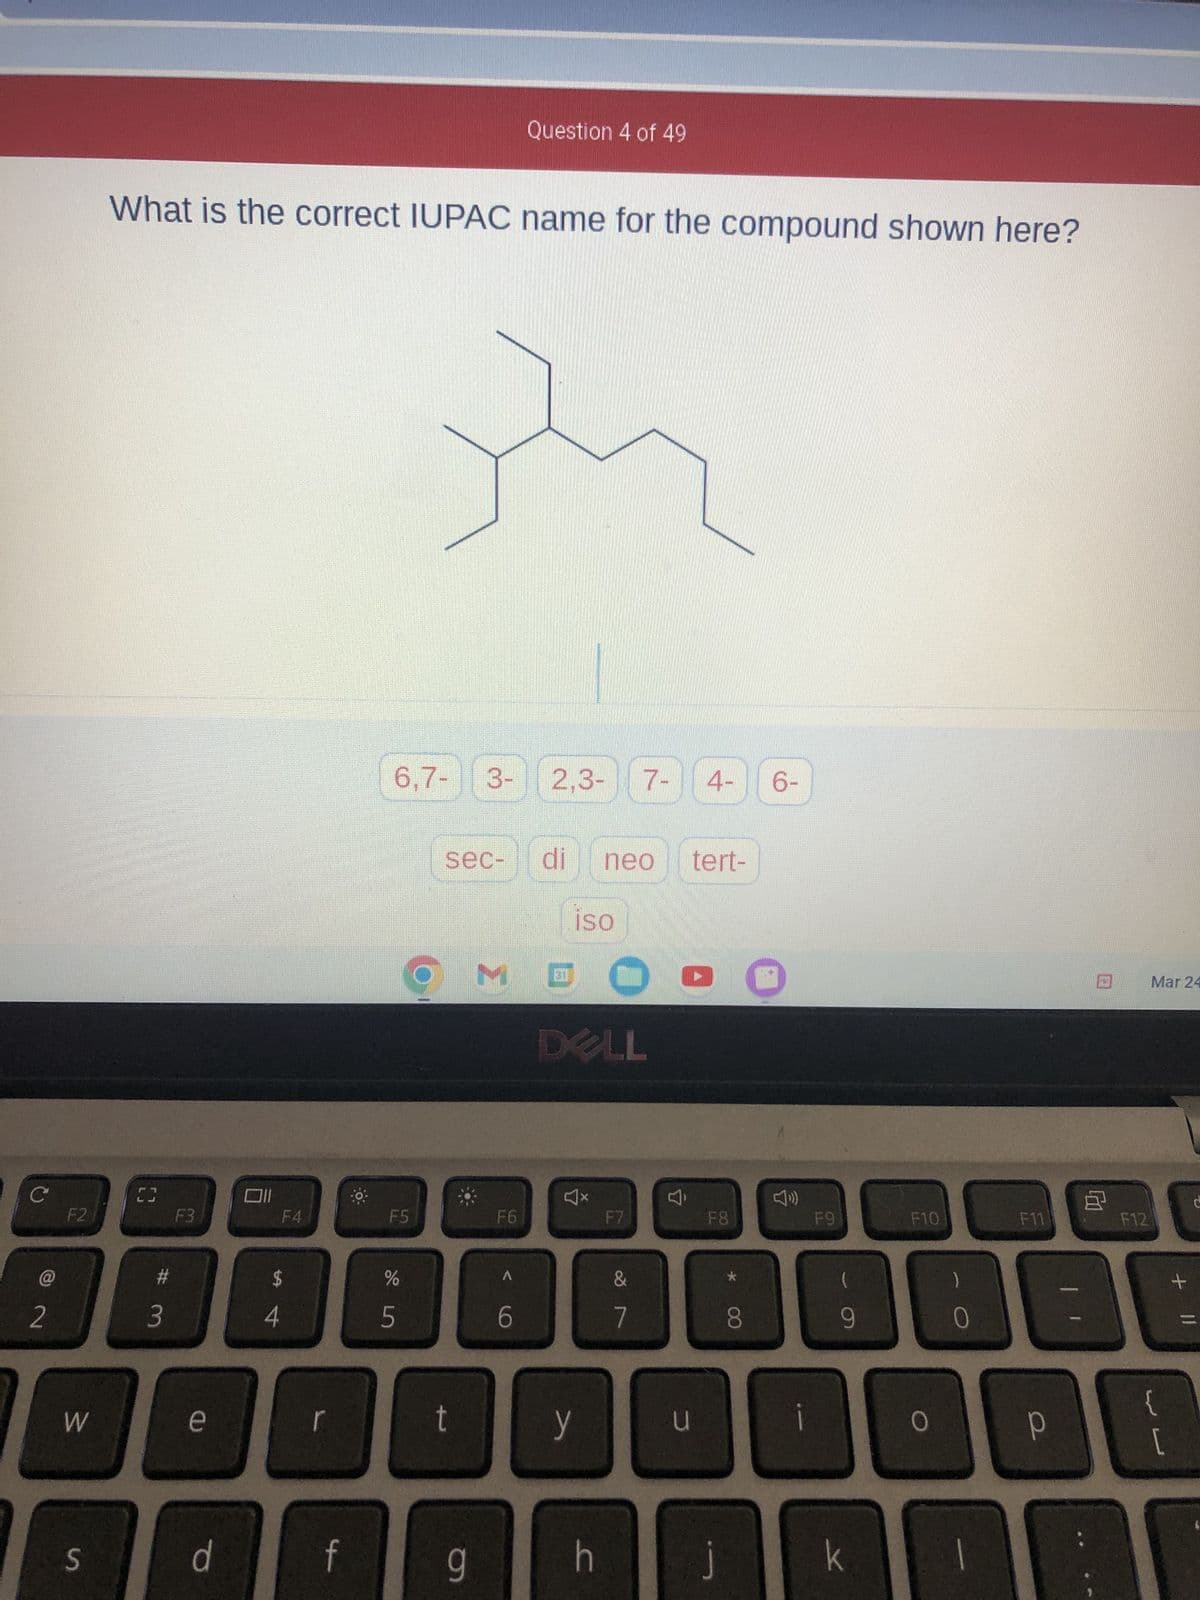 C
2
F2
W
S
What is the correct IUPAC name for the compound shown here?
C3
#m
3
F3
d
F4
$
f
6,7- 3- 2,3- 7- 4-
F5
de in
%
5
D
sec-
OM
t
9
Question 4 of 49
F6
6
di neo tert-
iso
DELL
y
h
F7
&
7
u
F8
*
8
6-
i
F9
(
9
k
F10
0
1
F12
B
Р
Mar 24
{
[
+
11